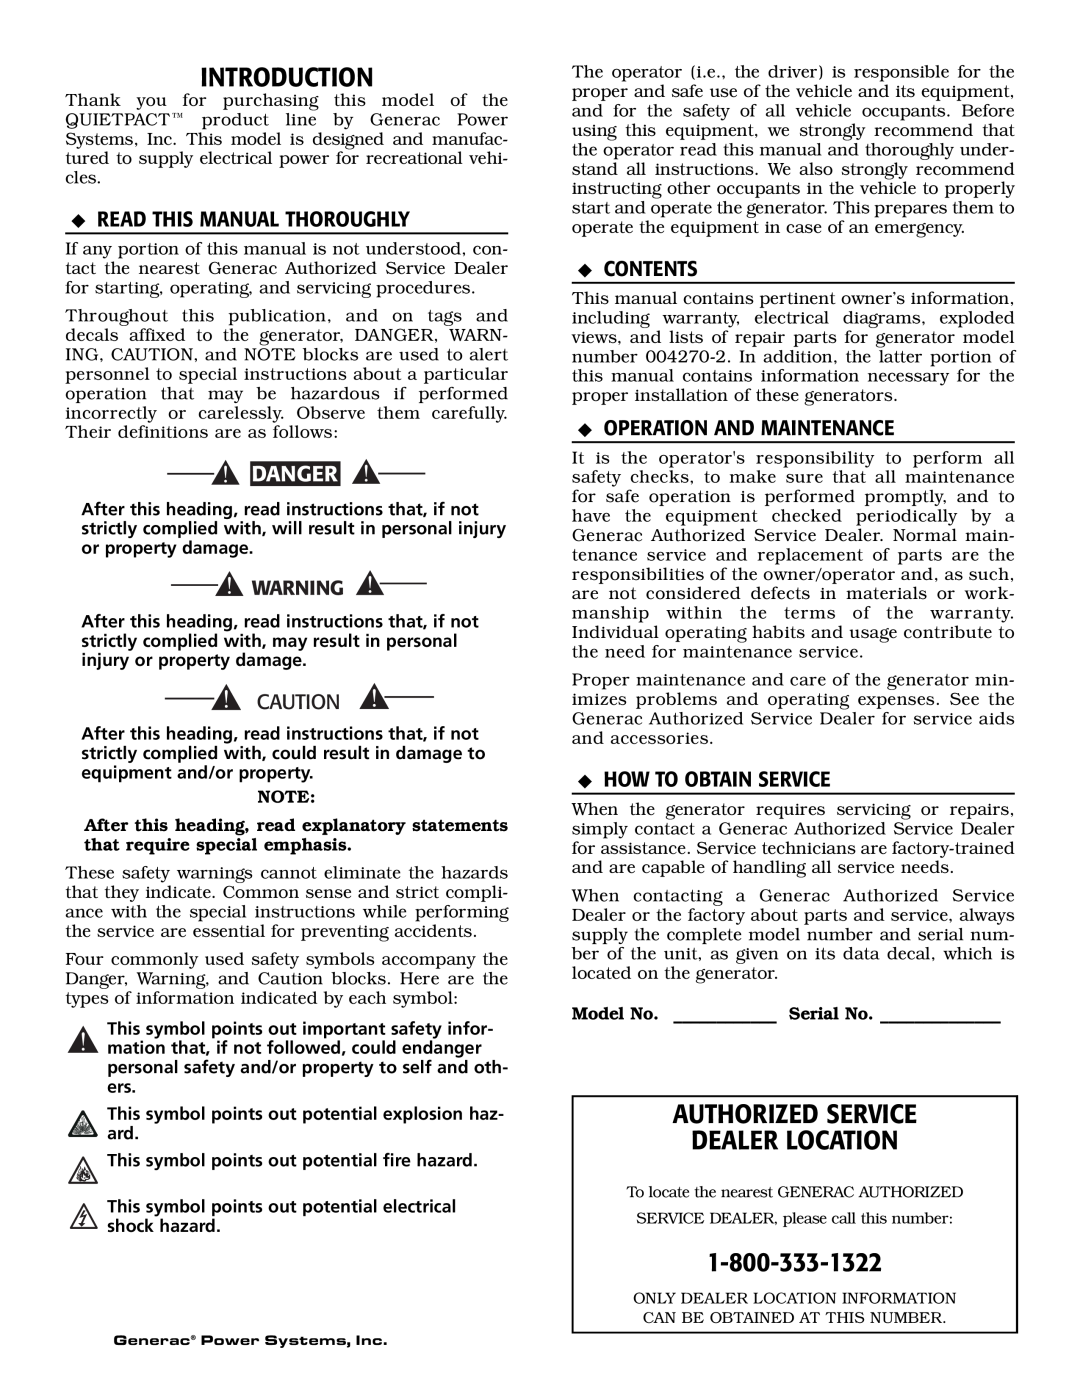 Guardian Technologies 004270-2 Introduction, Authorized Service Dealer Location, Read This Manual Thoroughly, Danger 